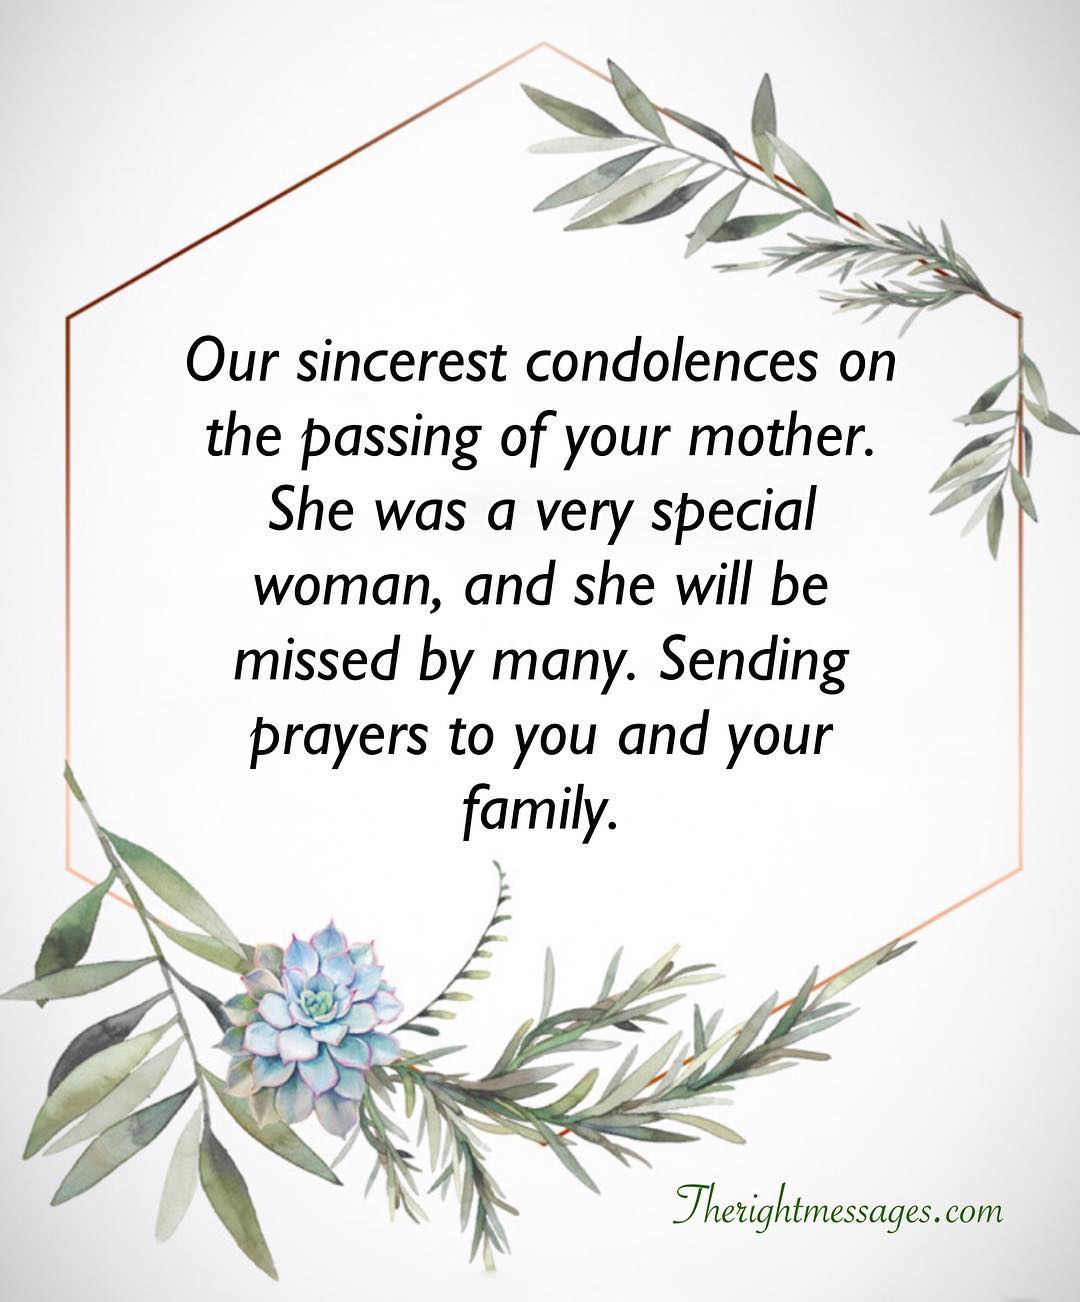 consolation message on death of mother